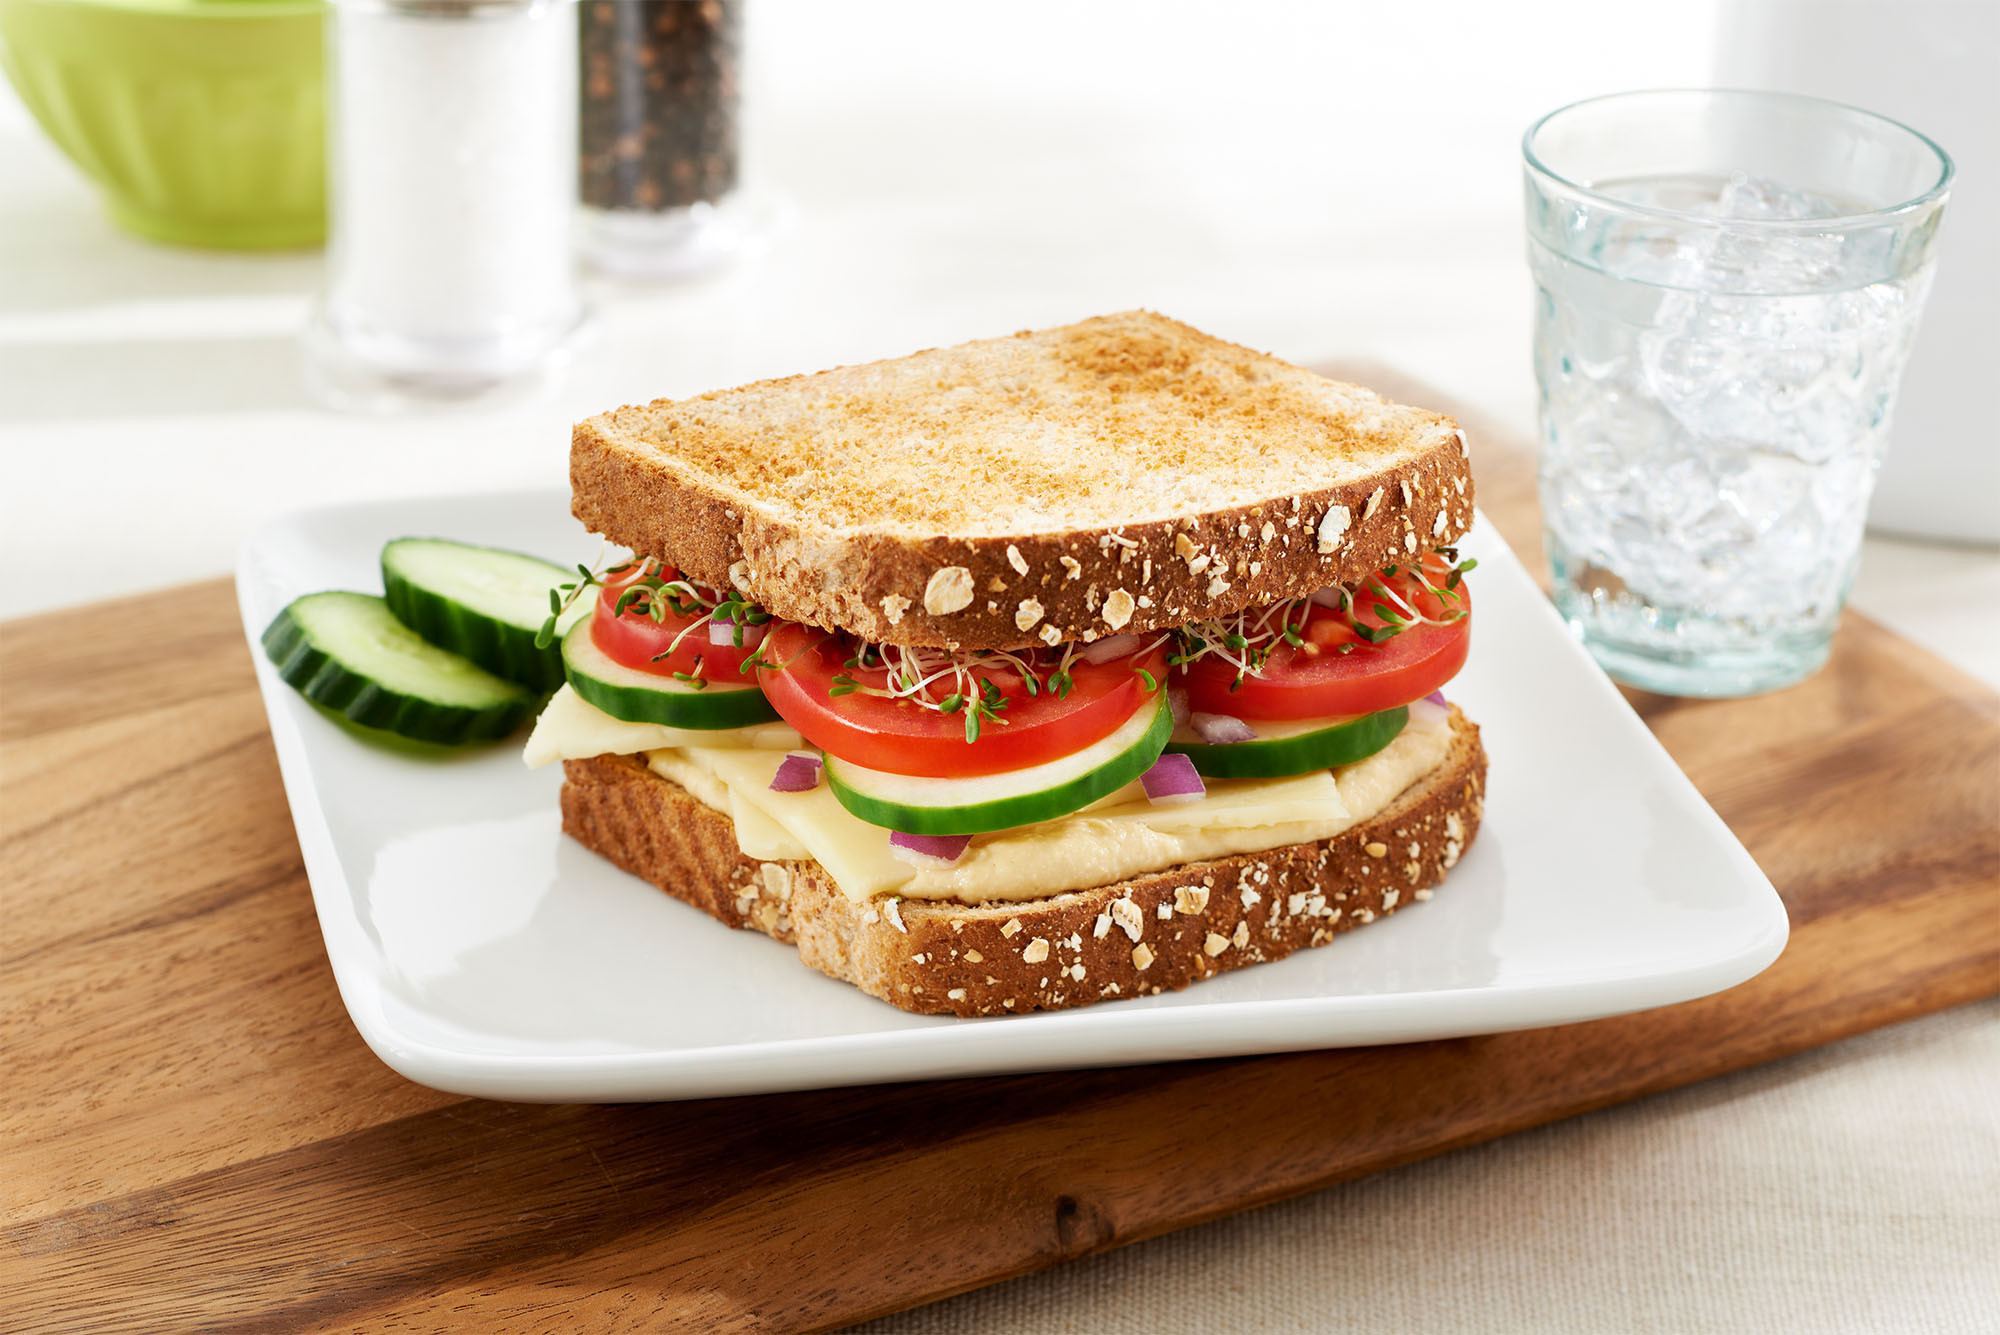 Healthy Sandwich Bread
 Get nutrition naturally in 2013 with these classic